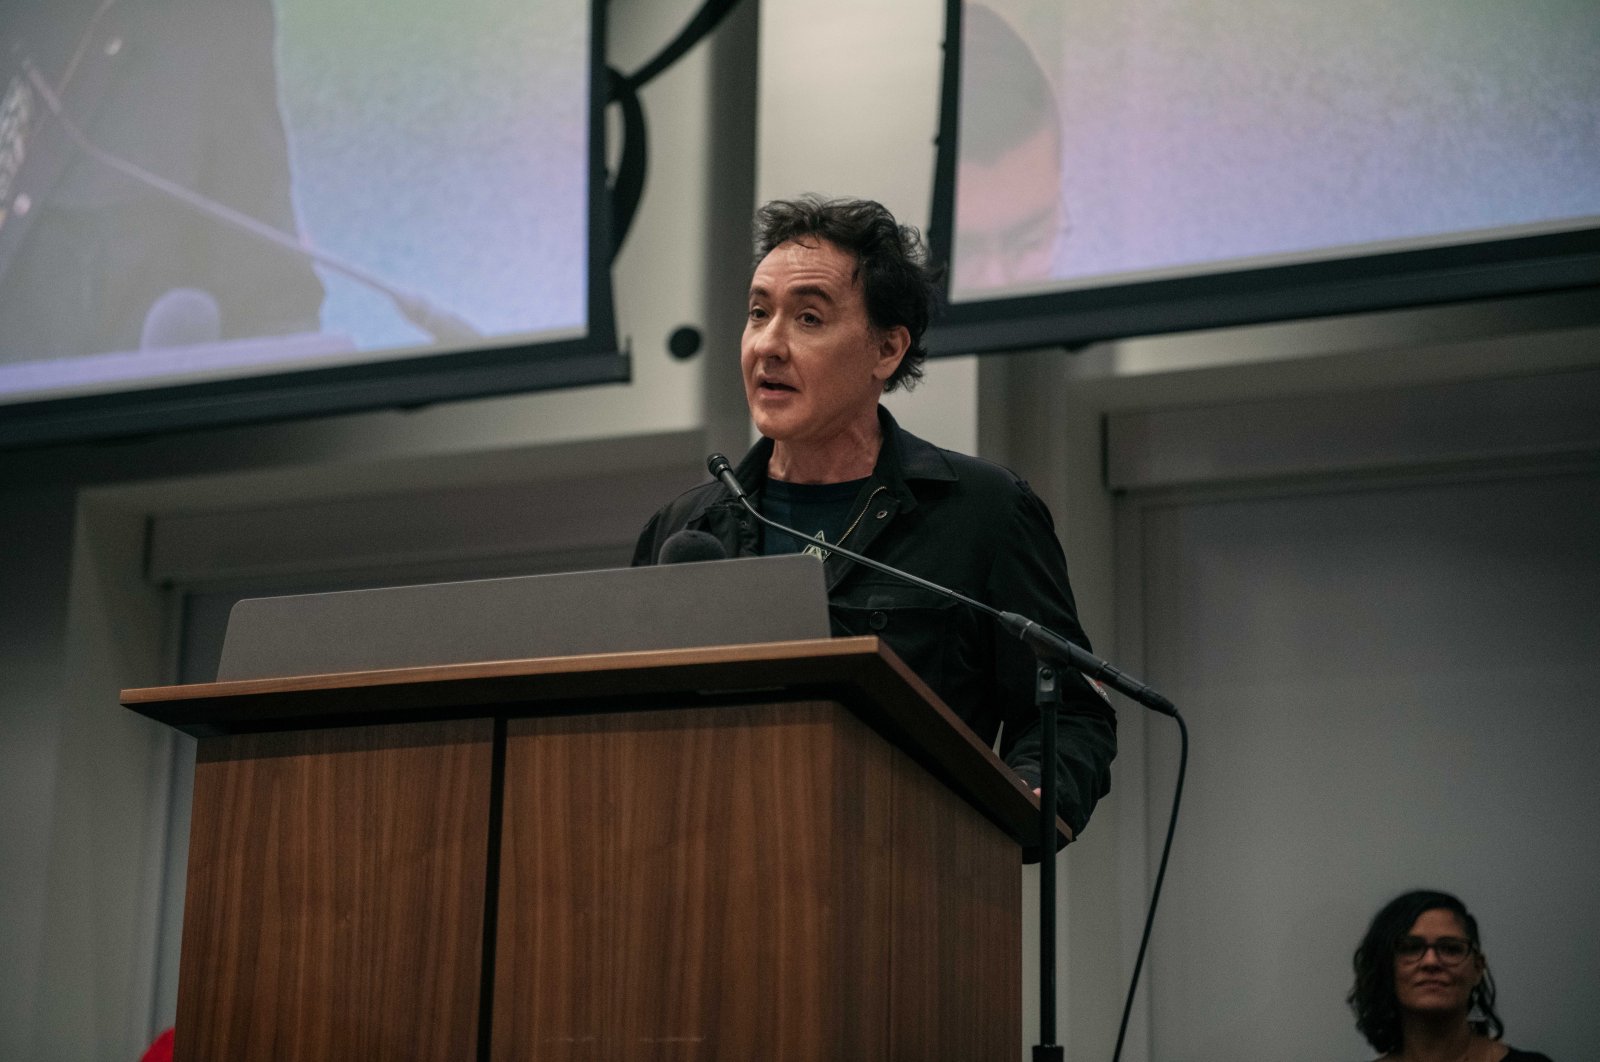 Actor John Cusack speaks at a rally ahead of an upcoming potential strike, Chicago, U.S., Sept. 24, 2019. (Getty Images Photo)